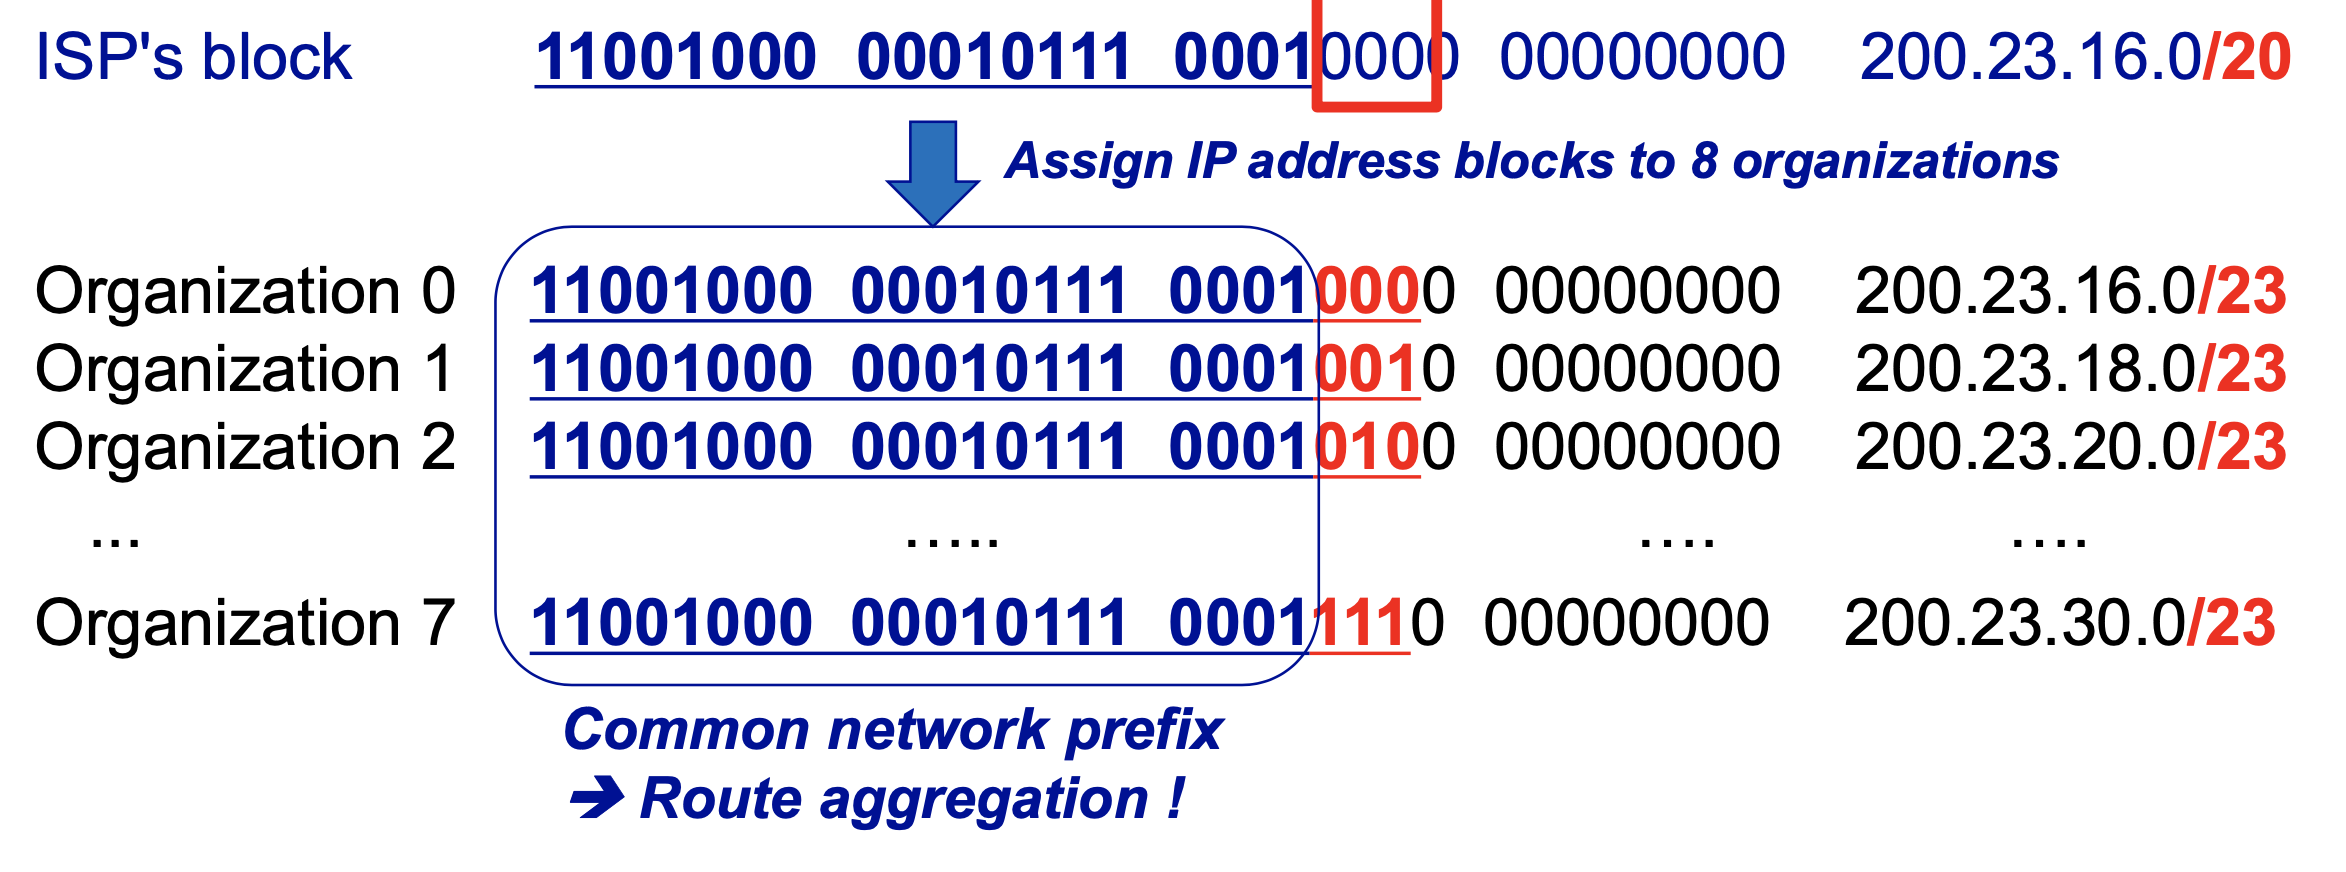 ../../../../../public/assets/2021-07-23-Network-data-layer/isp_block.png